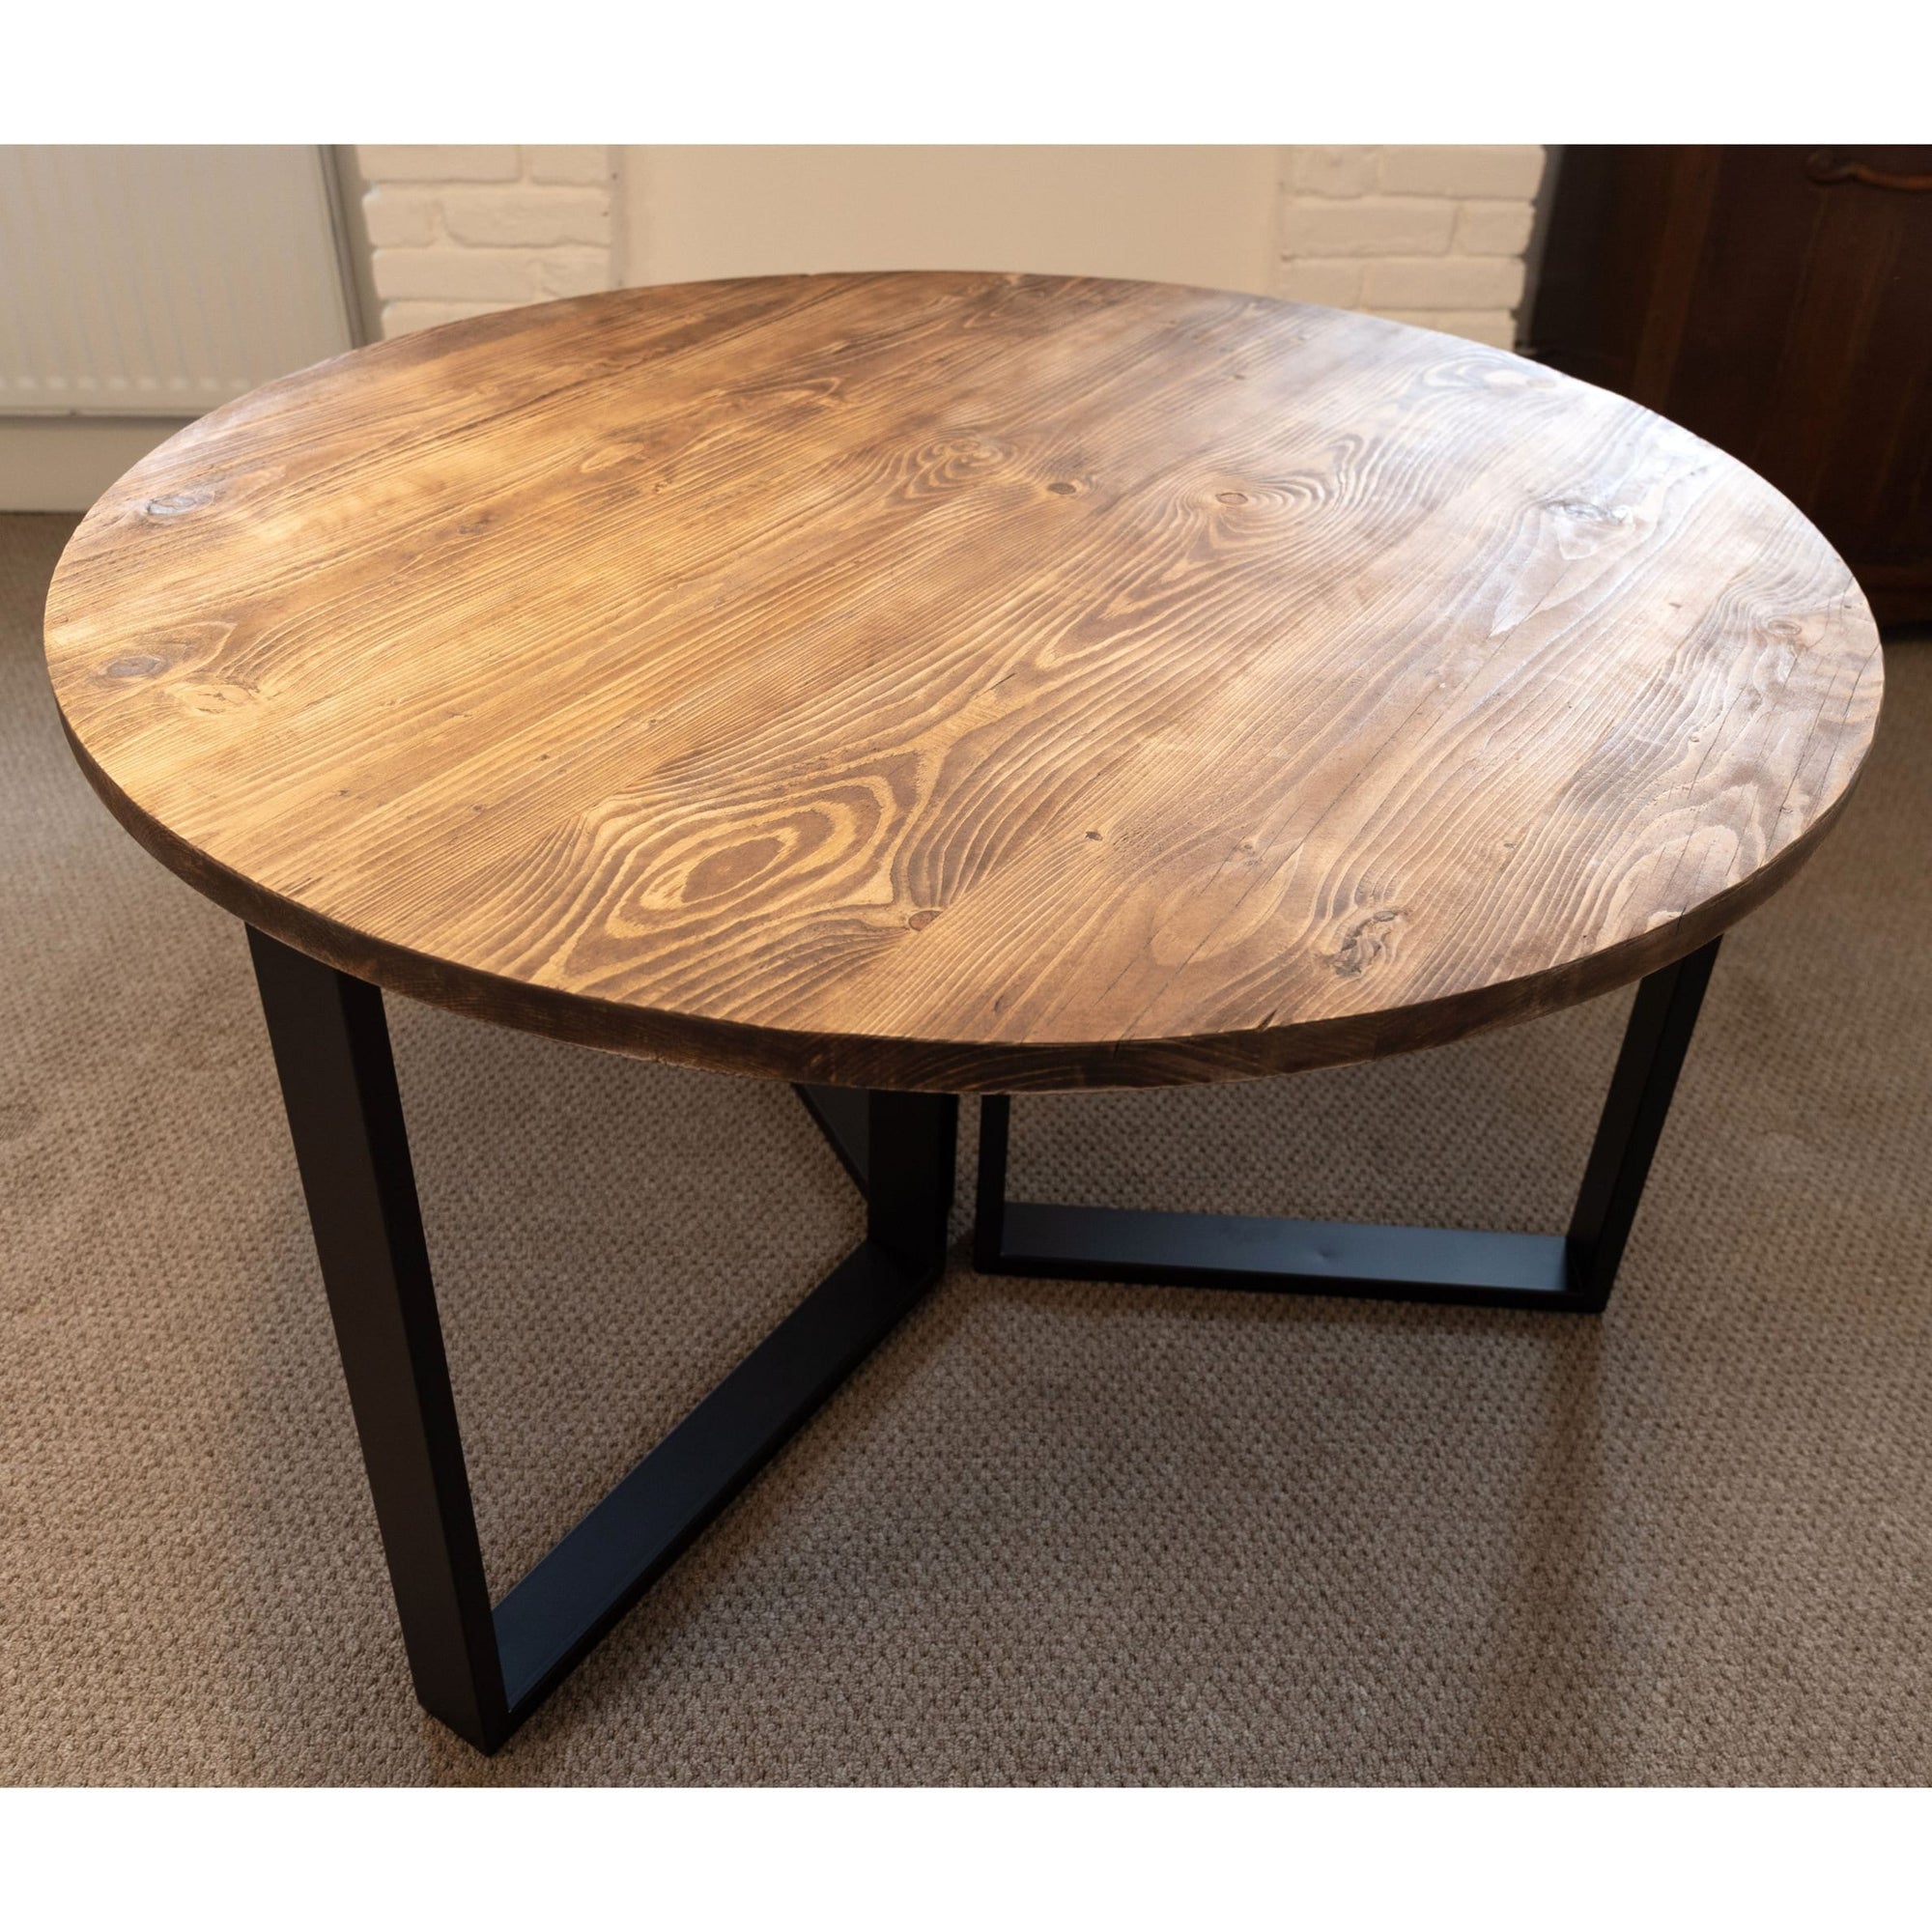 ASTRID: Round Reclaimed Wood Table with Box Steel Legs, Made in the UK